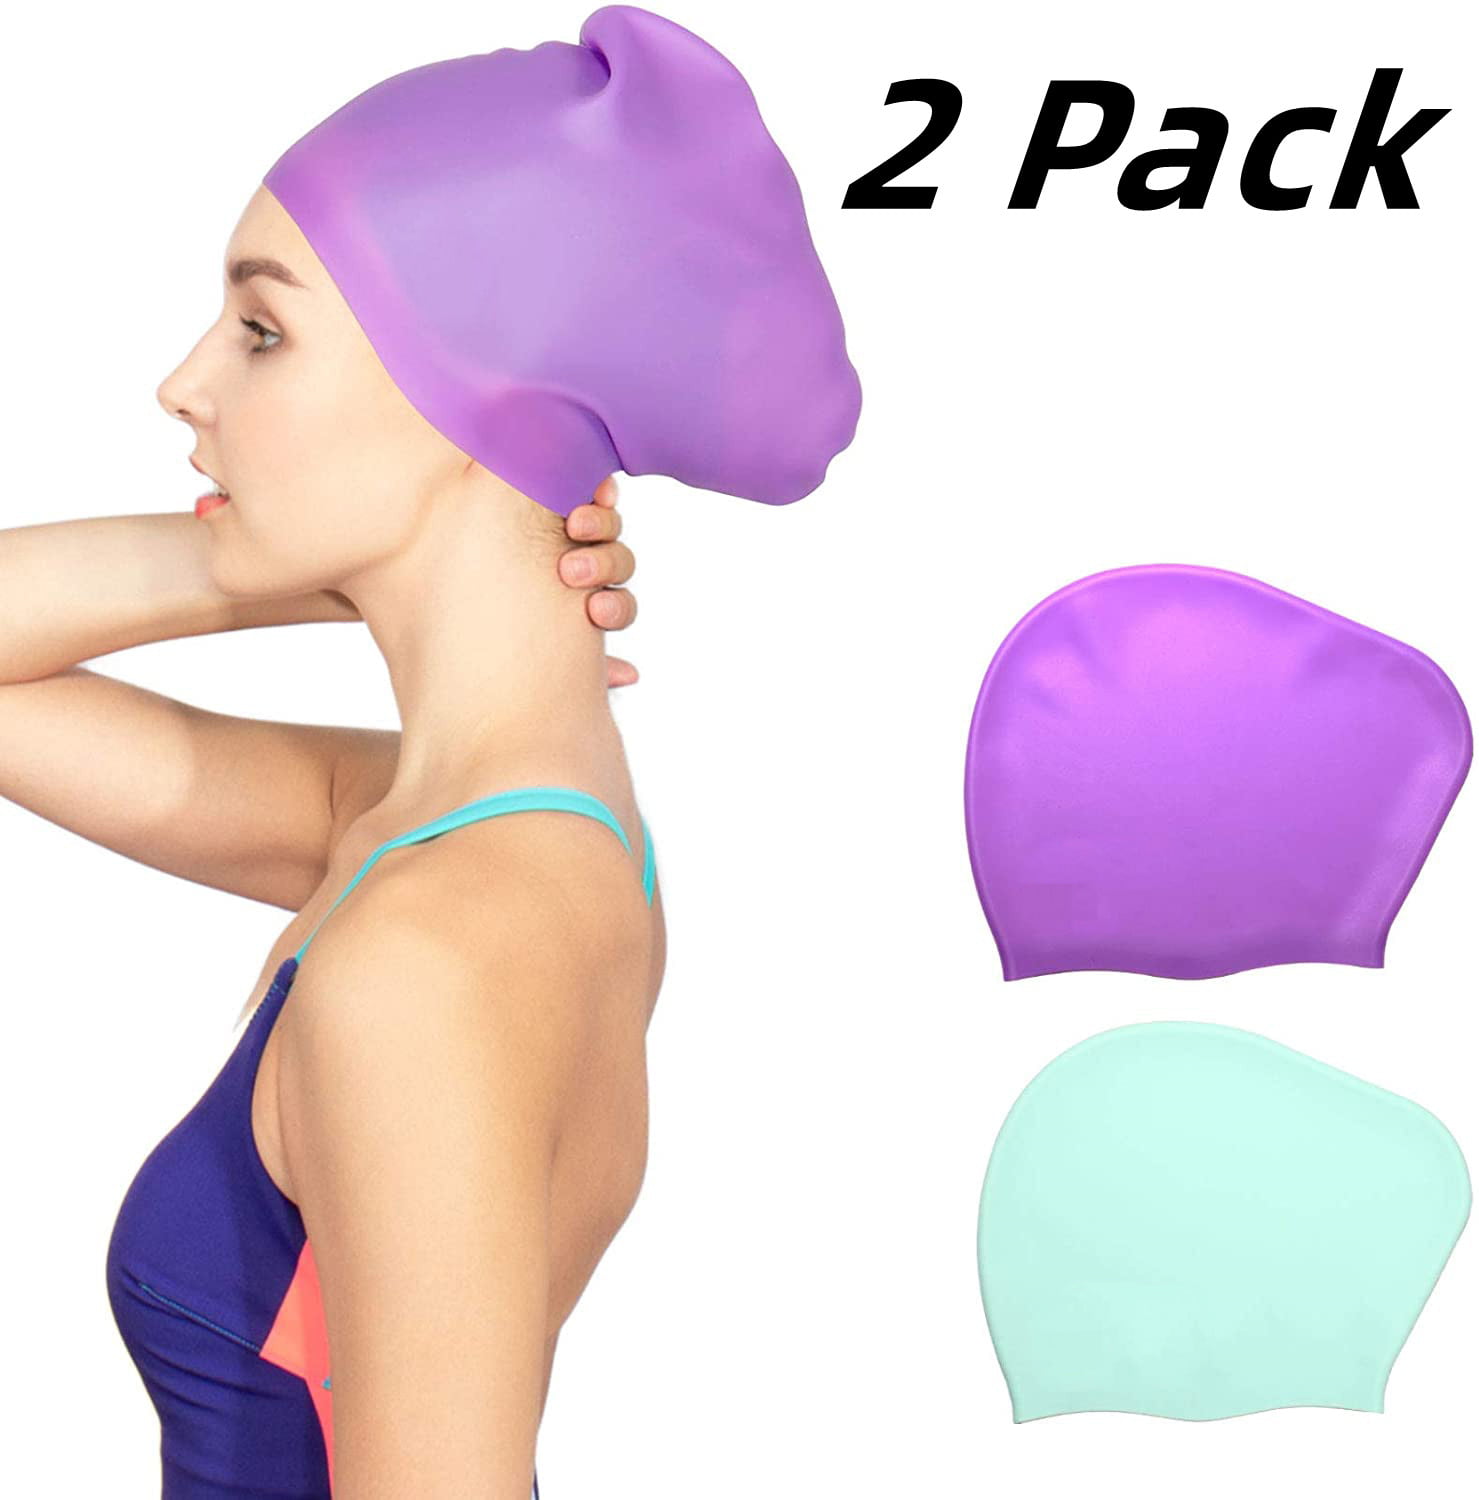 Silicone Swimming Cap Waterproof Bathing Cap w/ Ear Pocket/Pouches for Adult/Kid 